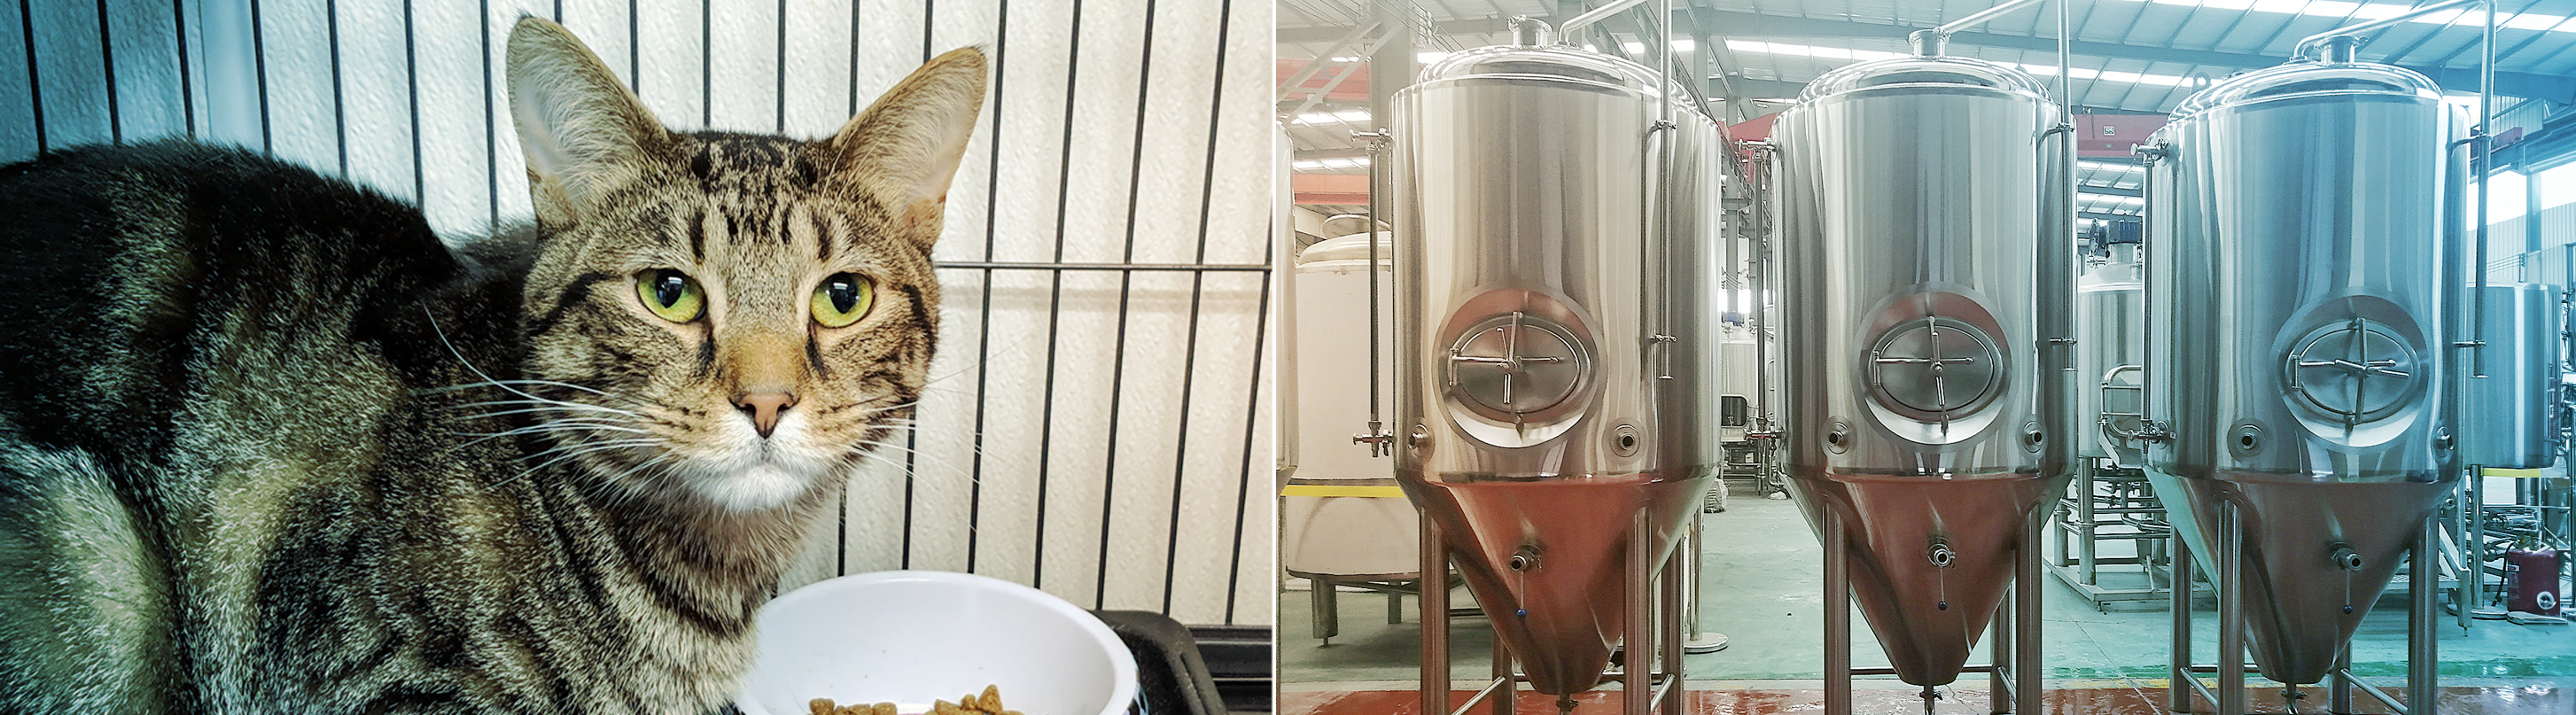 An image of a cat with a bowl of food and a second image of 3 fermentation tanks